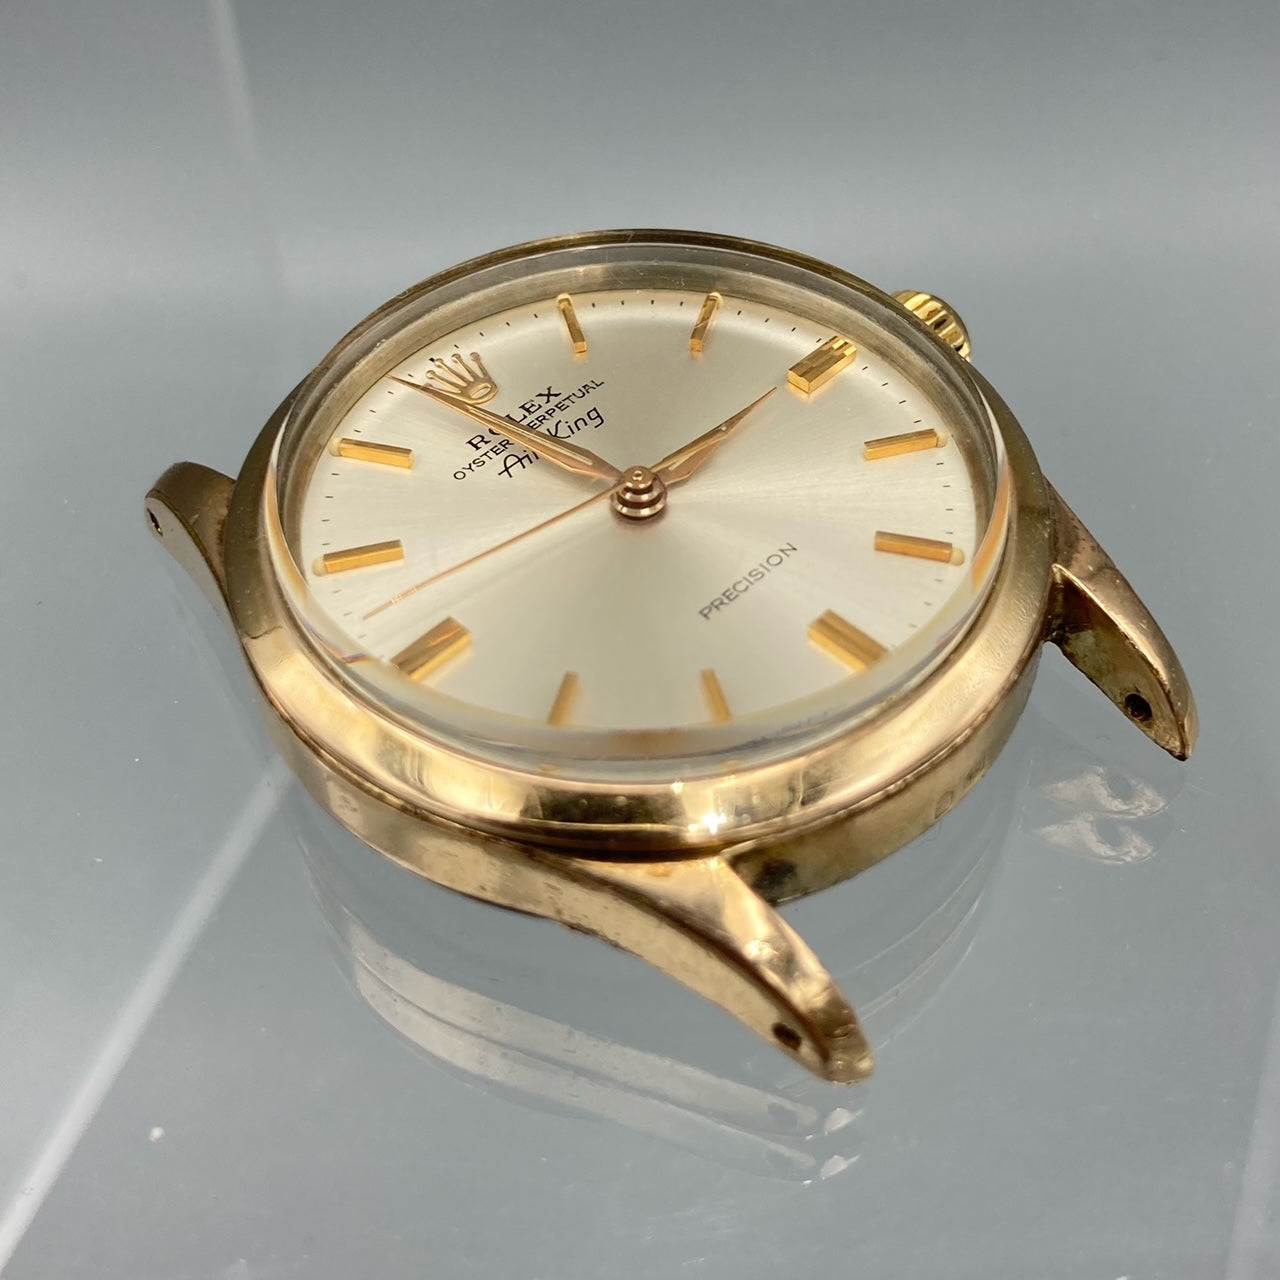 Rolex Air-King Precision Vintage Gold-Capped Watch - 5506